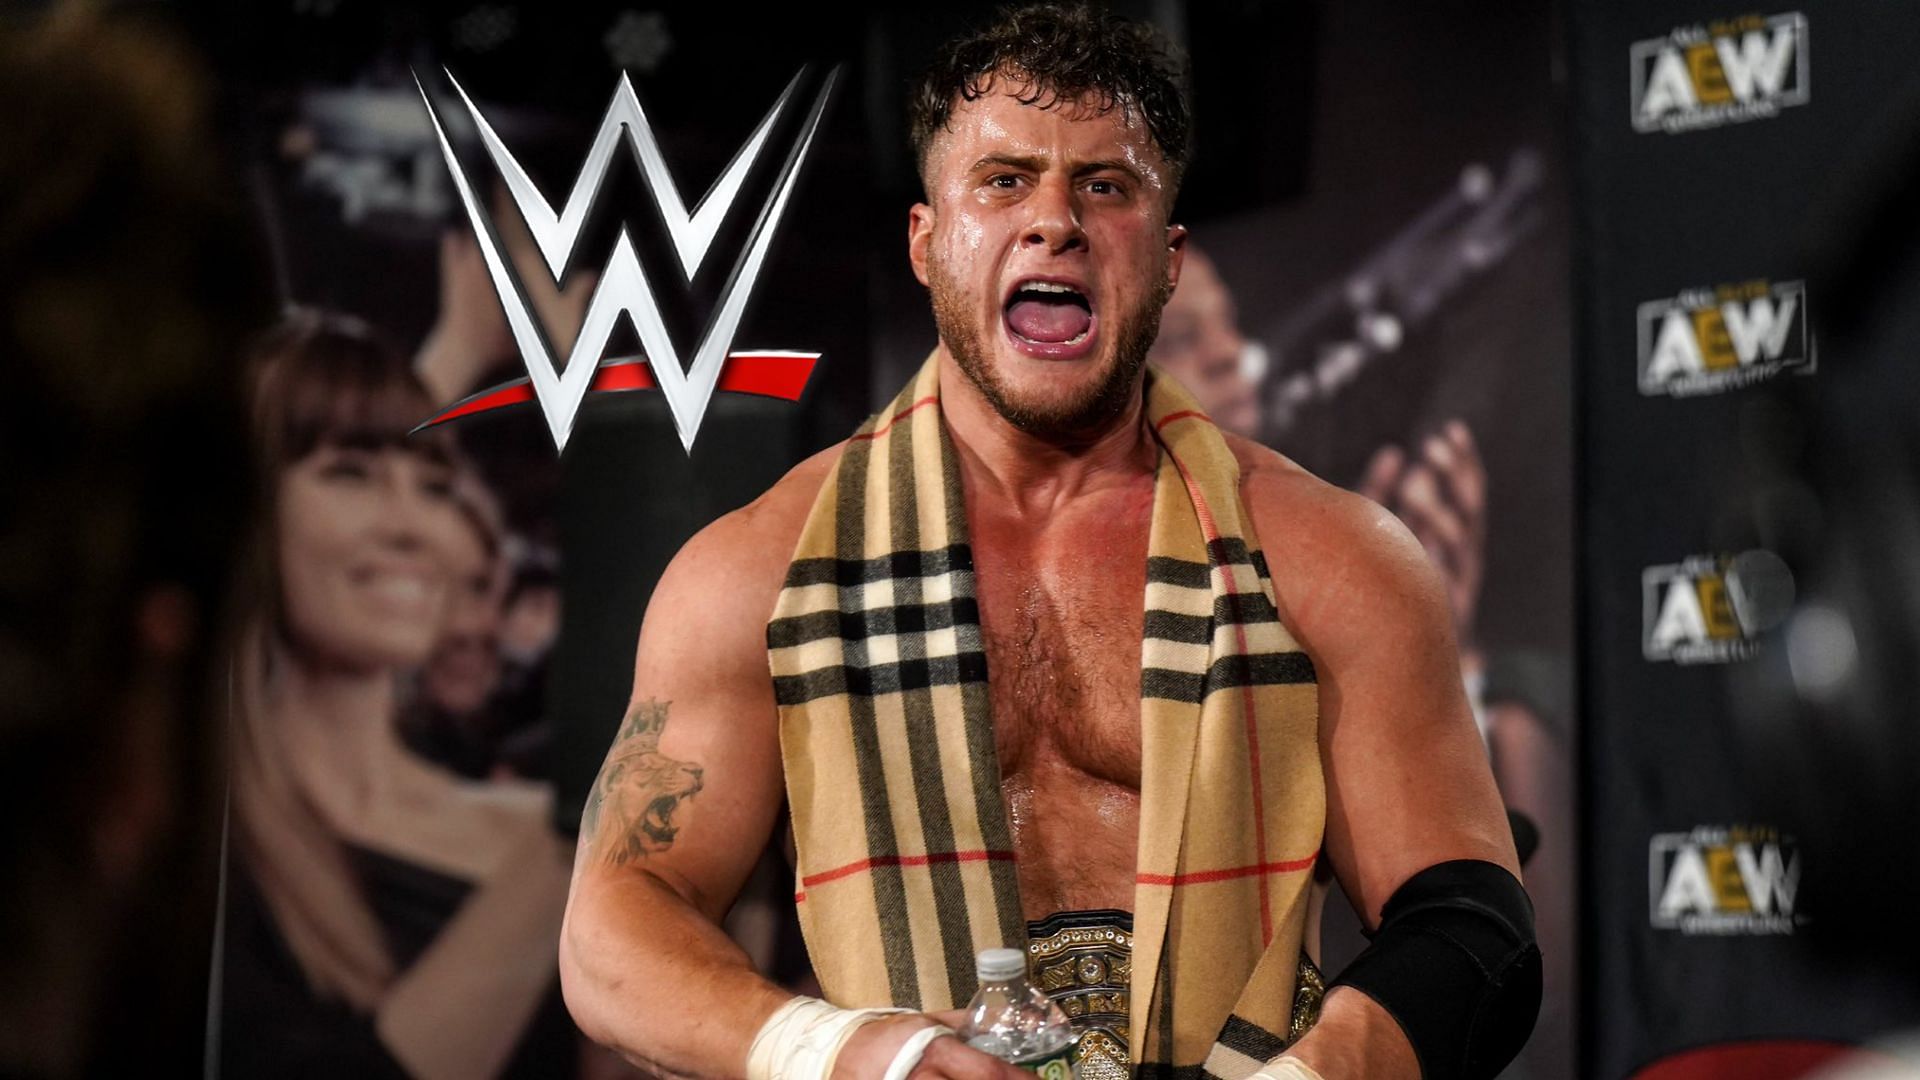 A former WWE Superstar reacted to MJF